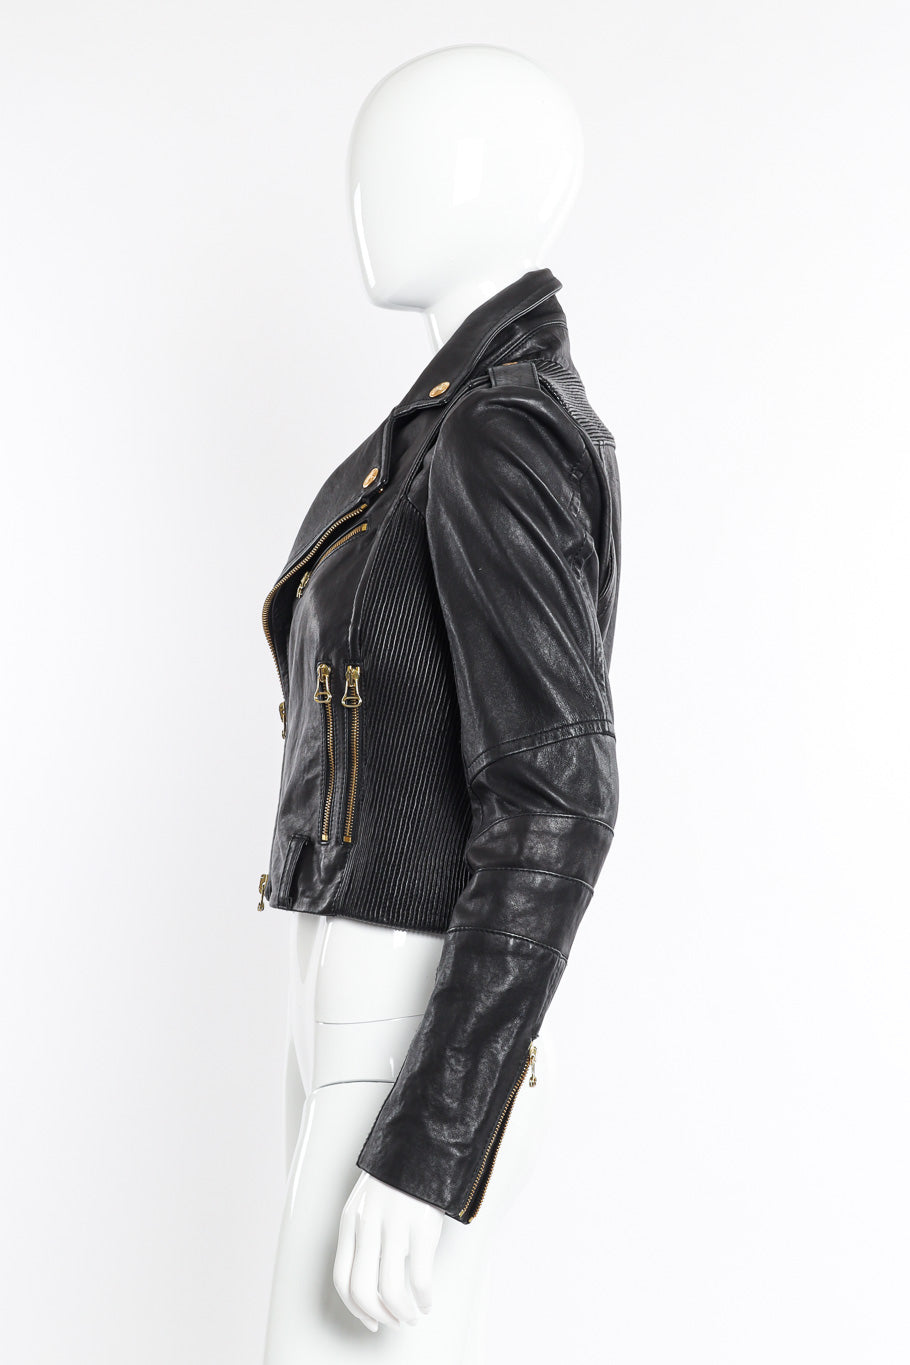 Pierre Balmain Ribbed Leather Moto Jacket side view on mannequin @Recessla